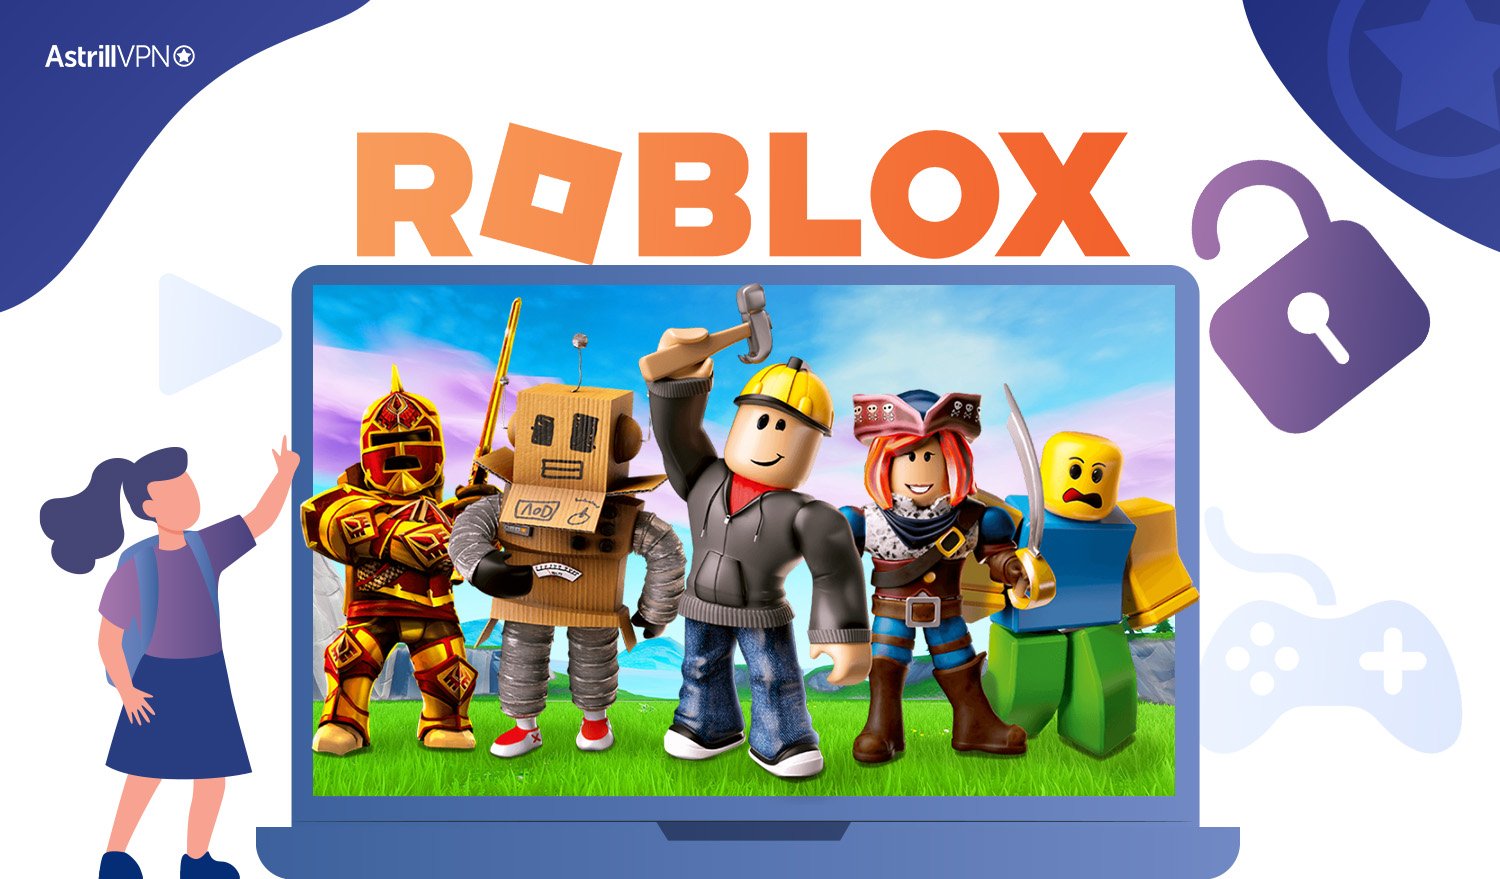 YOOO I CAN PLAY ROBLOX ON A SCHOOL CHROMEBOOK NOW